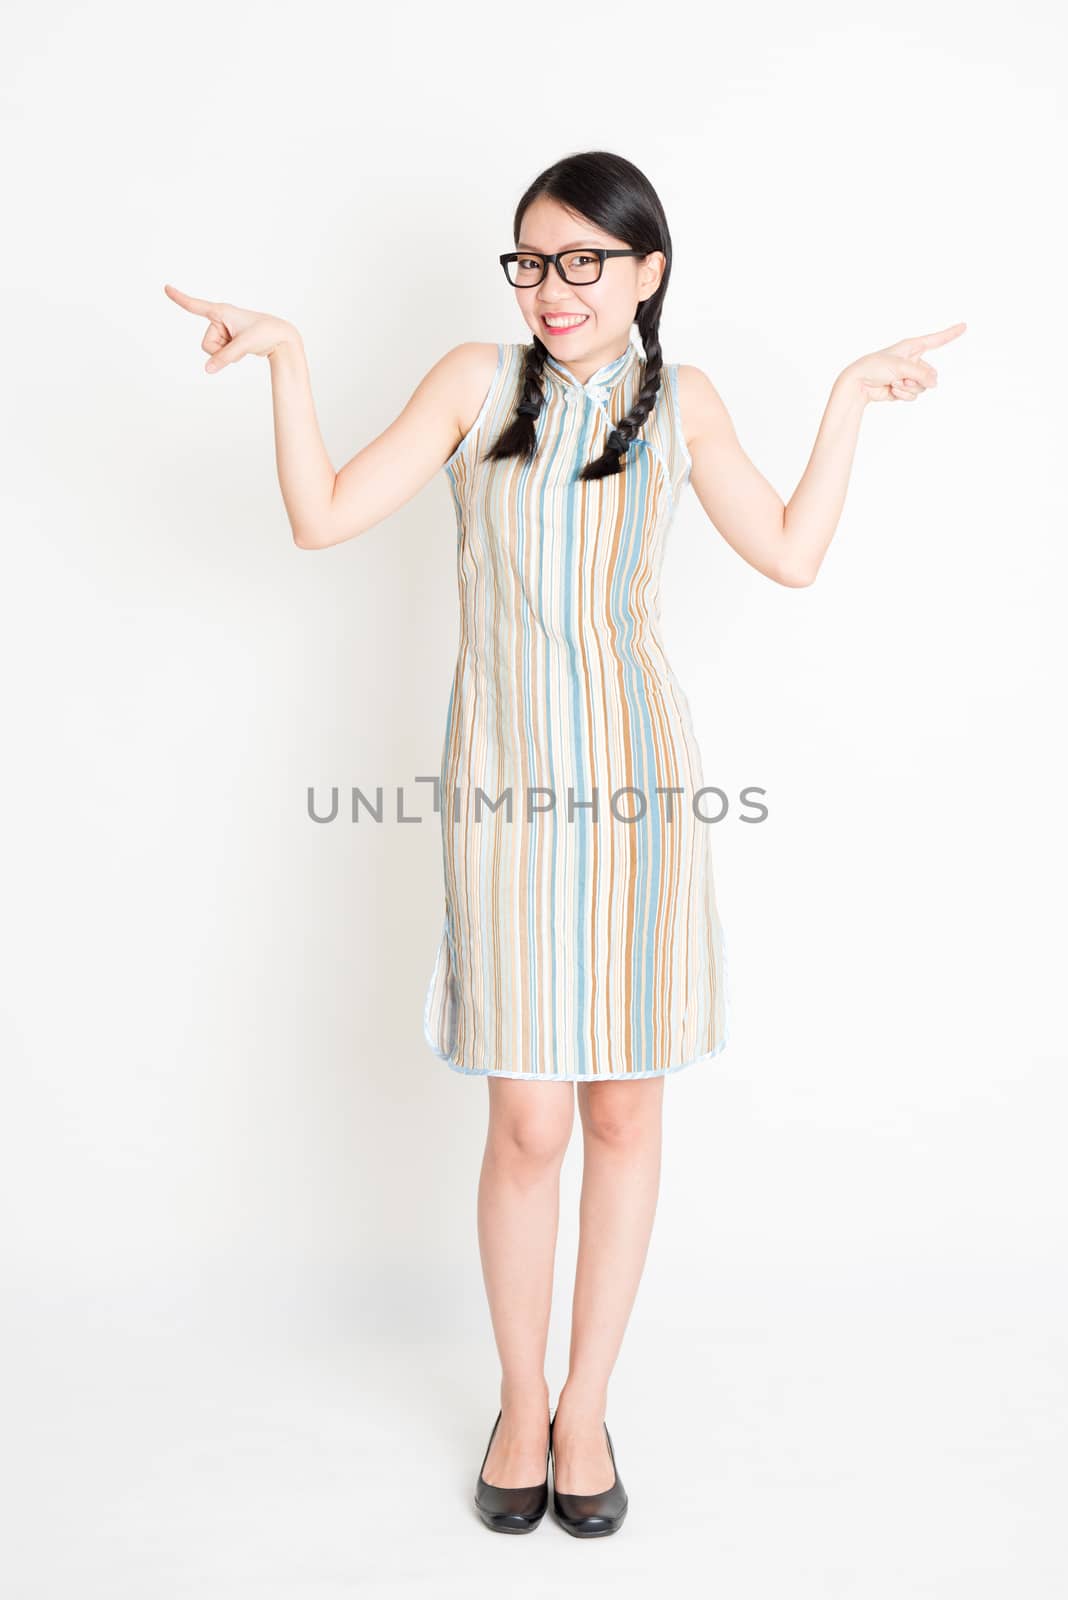 Portrait of young Asian woman in traditional qipao dress finger pointing at something, full length standing on plain background.